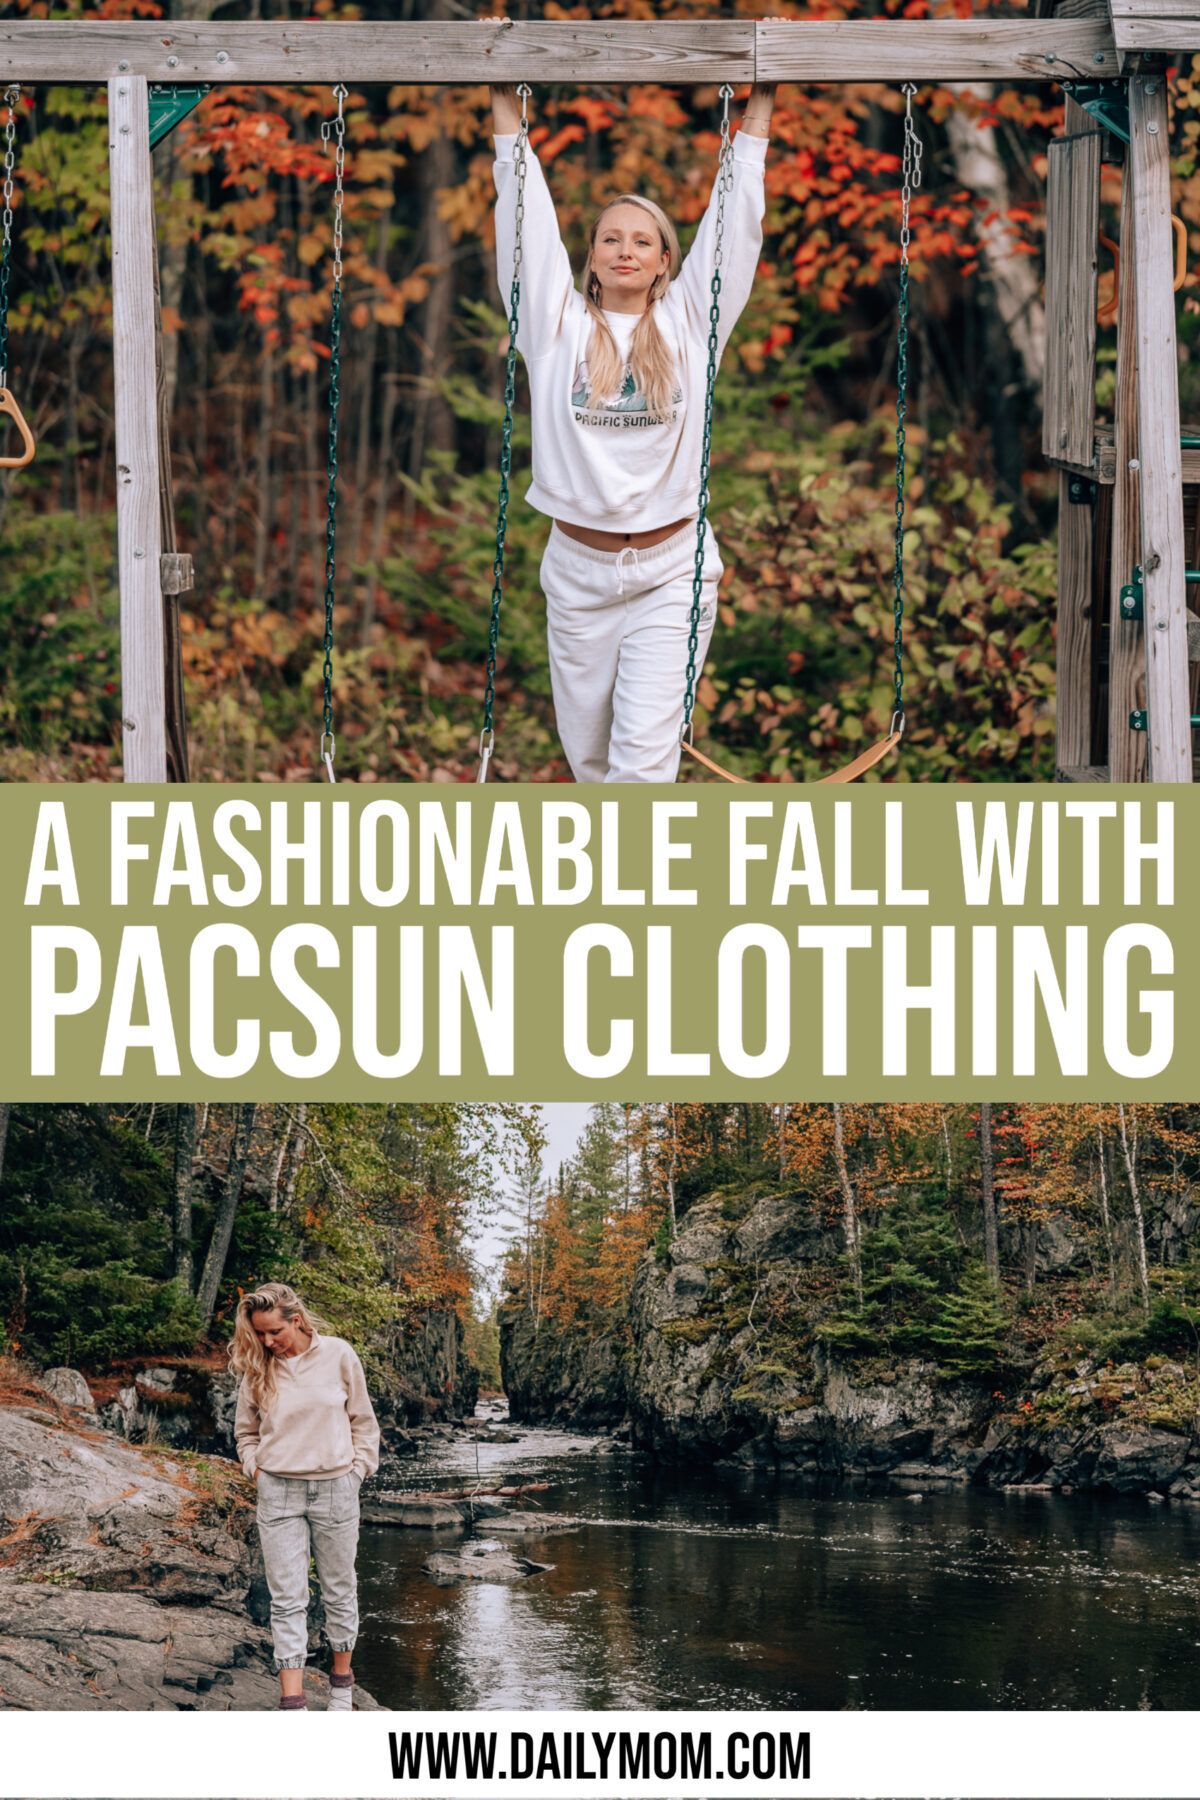 Forge A Fashionable Fall With Pacsun Clothing